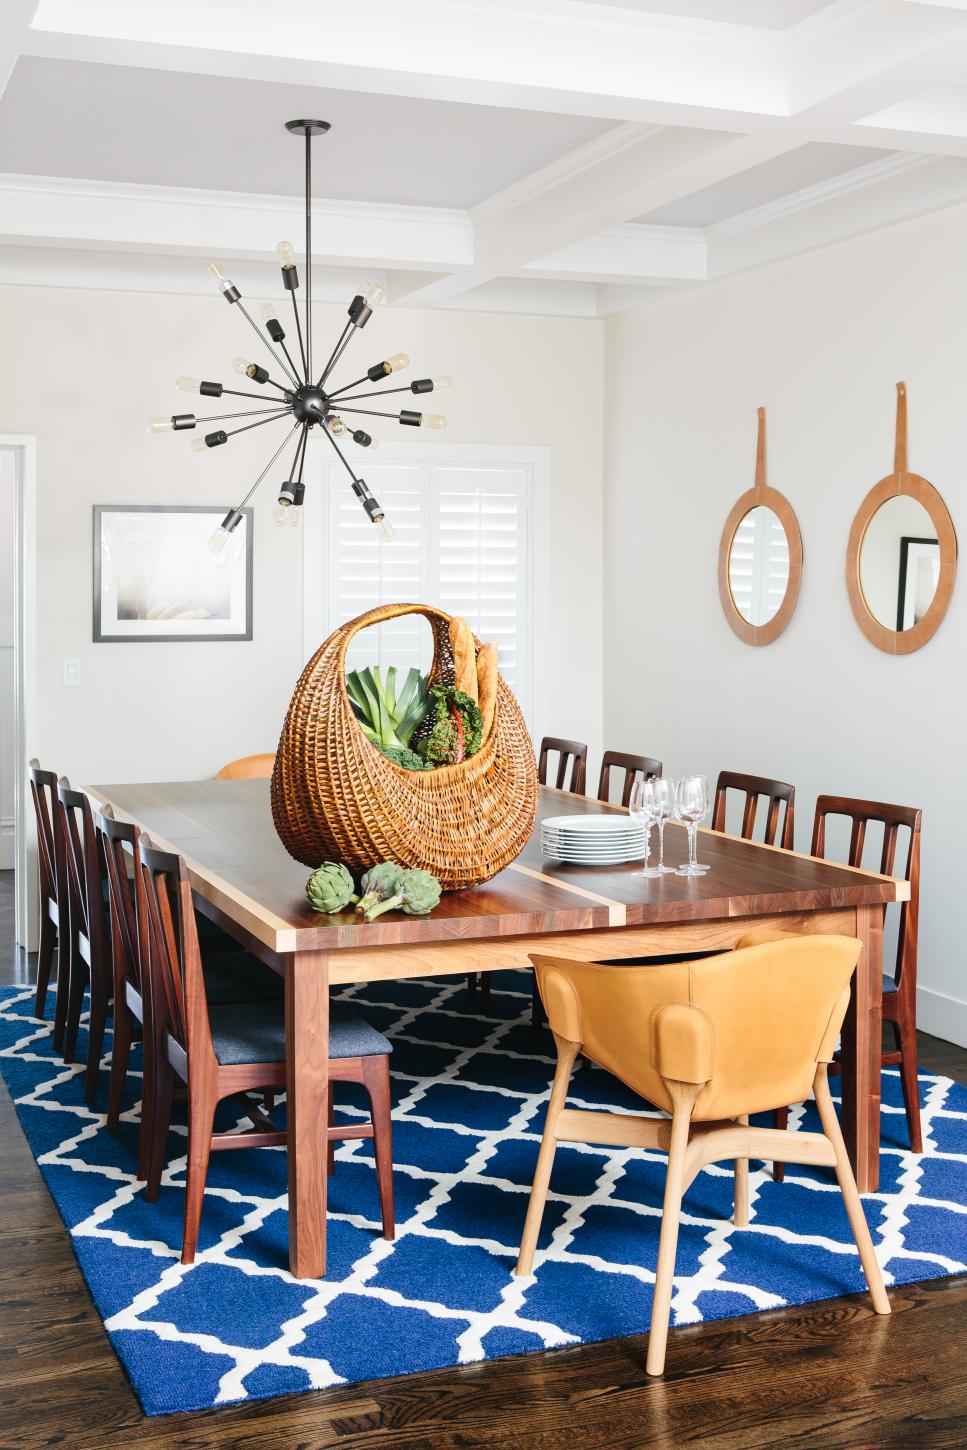 Bright Dining Room With Blue Patterned Rug, Large Dining Table and